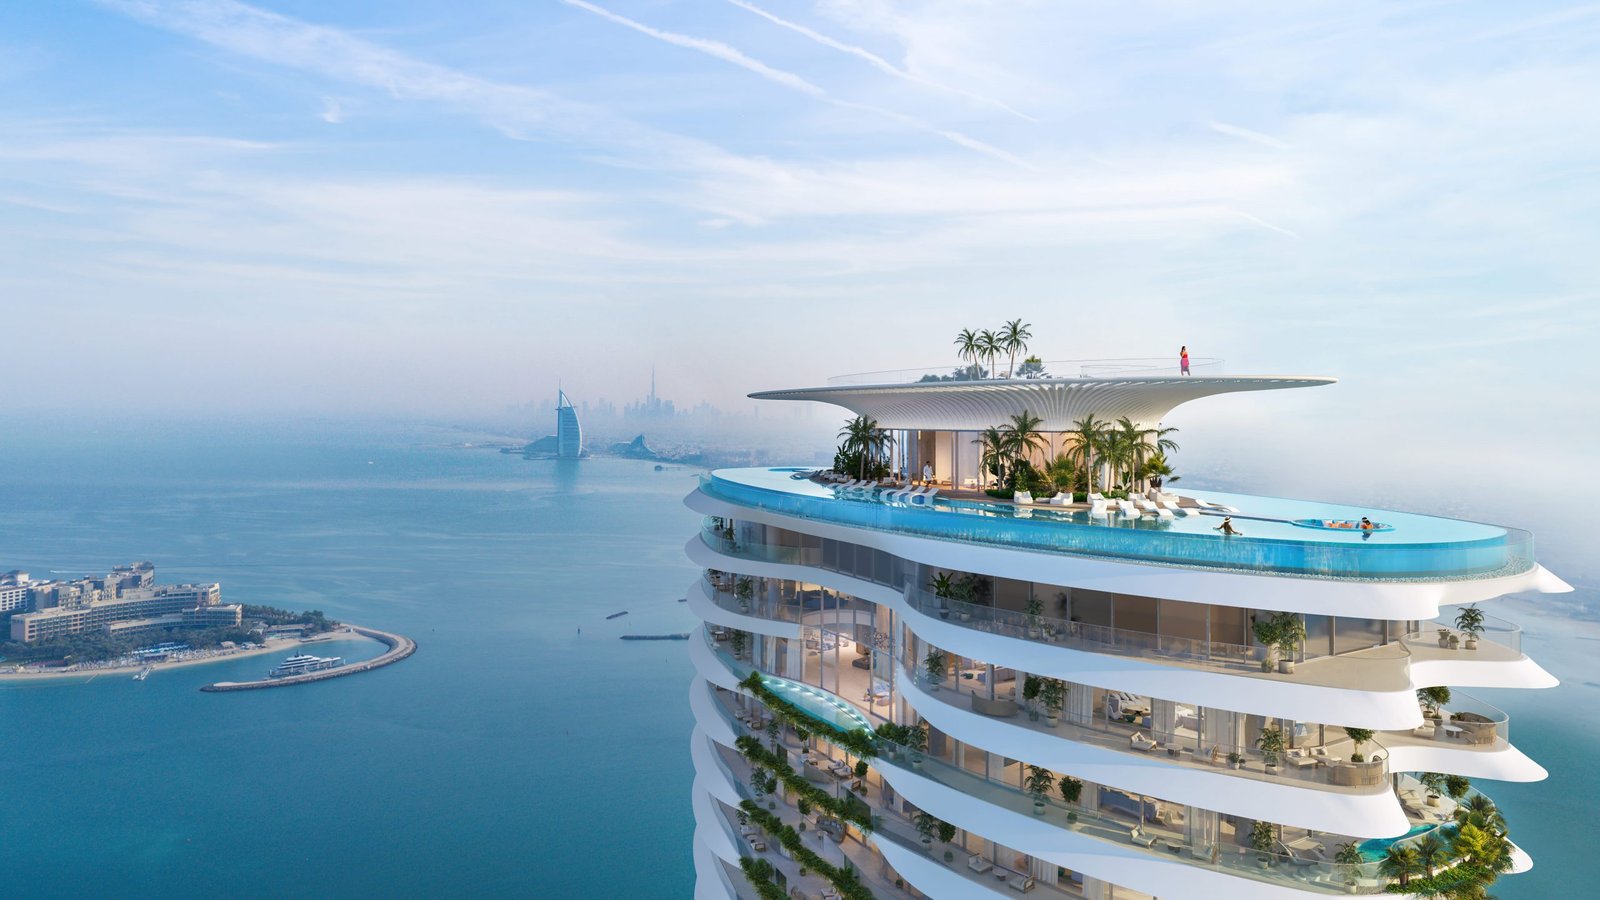 Most expensive penthouse in Dubai sold for Dh500 million